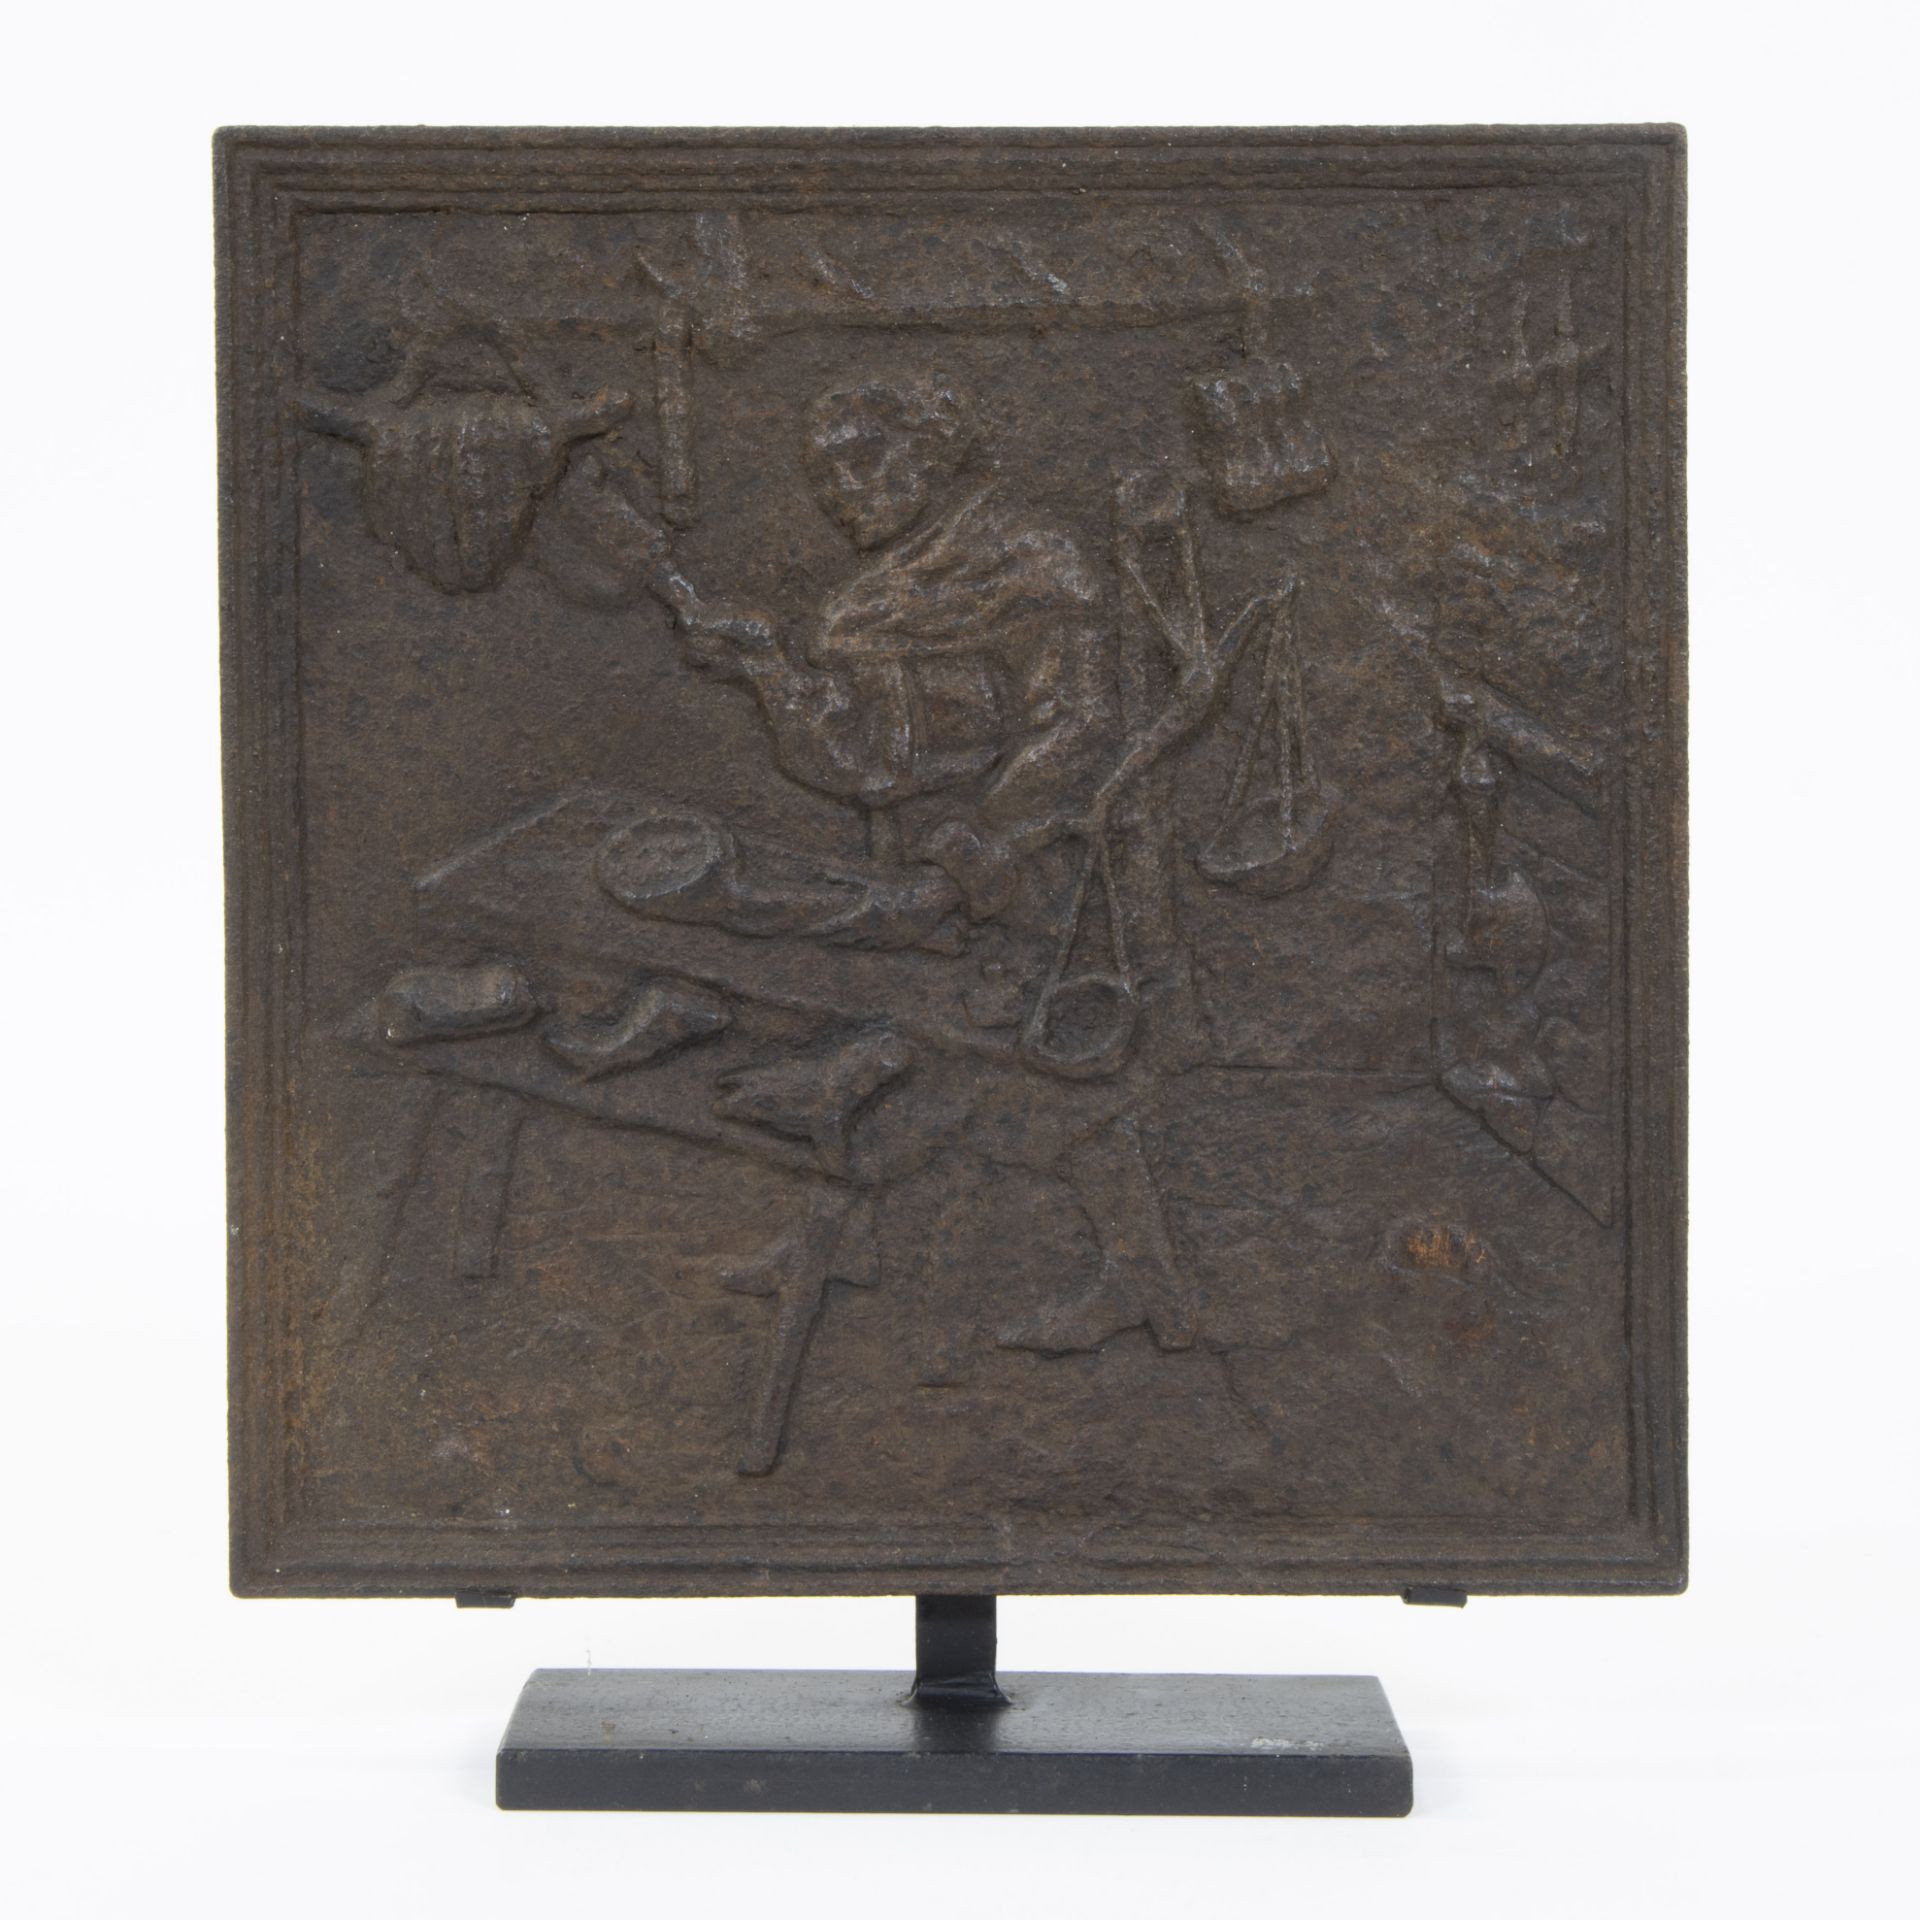 18th century cast-iron plaque with plinth depicting the butcher in his shop